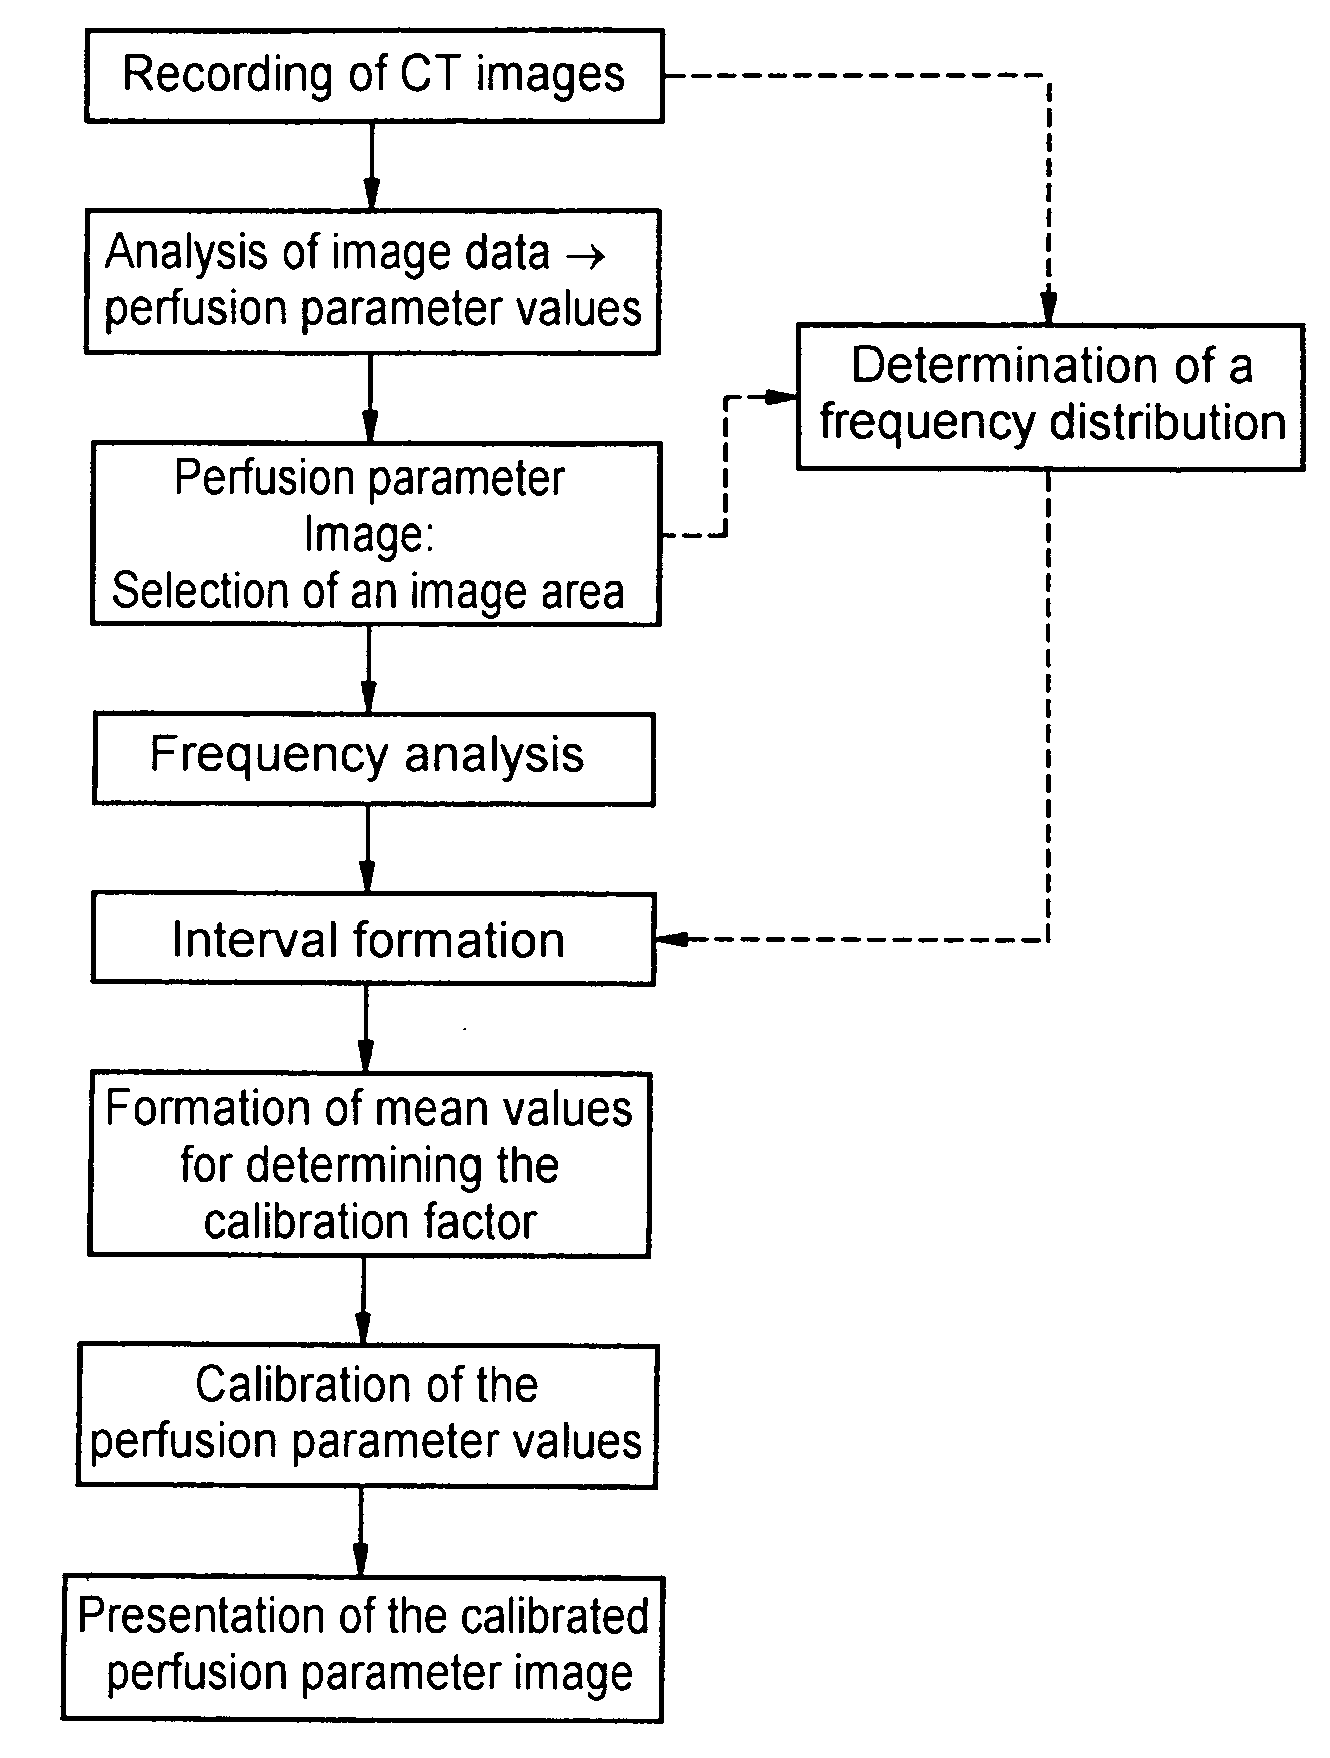 Method for automatic calibration of perfusion parameter images